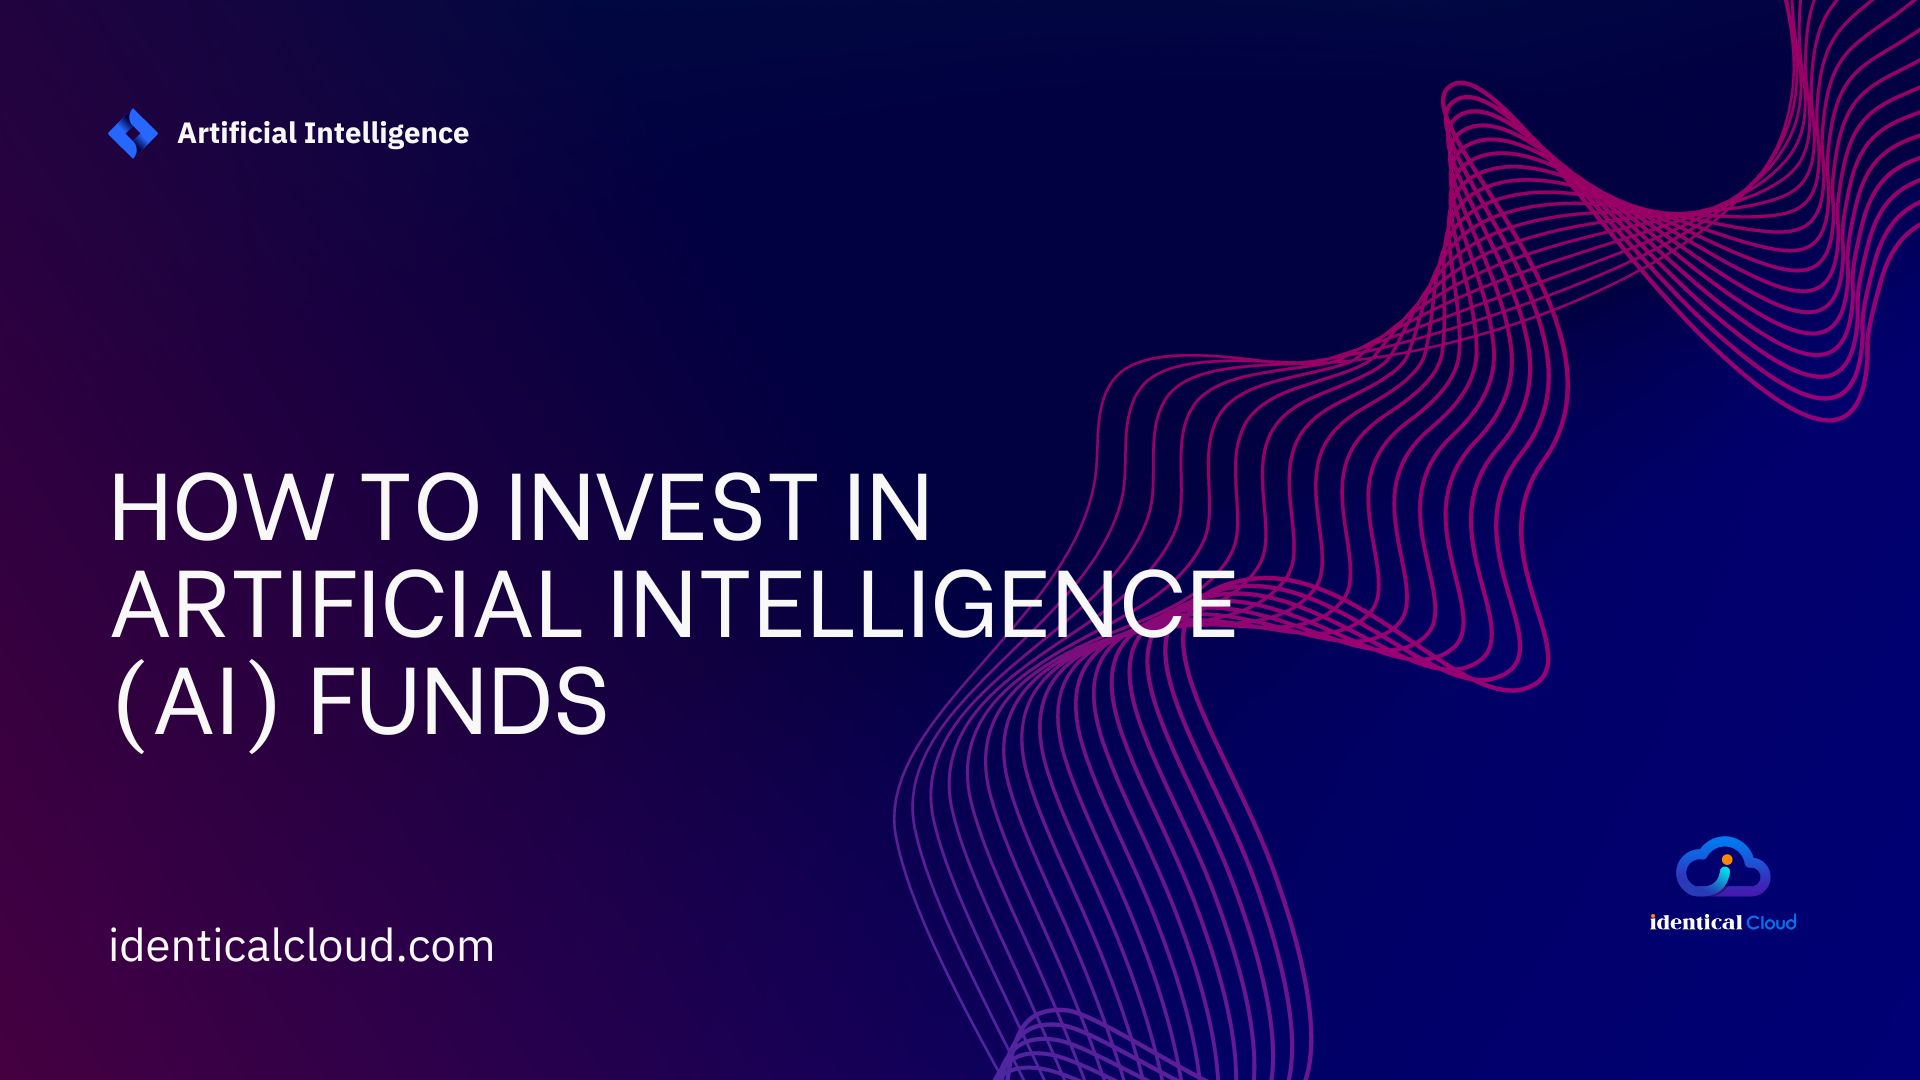 How To Invest In Artificial Intelligence (AI) Funds - identicalcloud.com